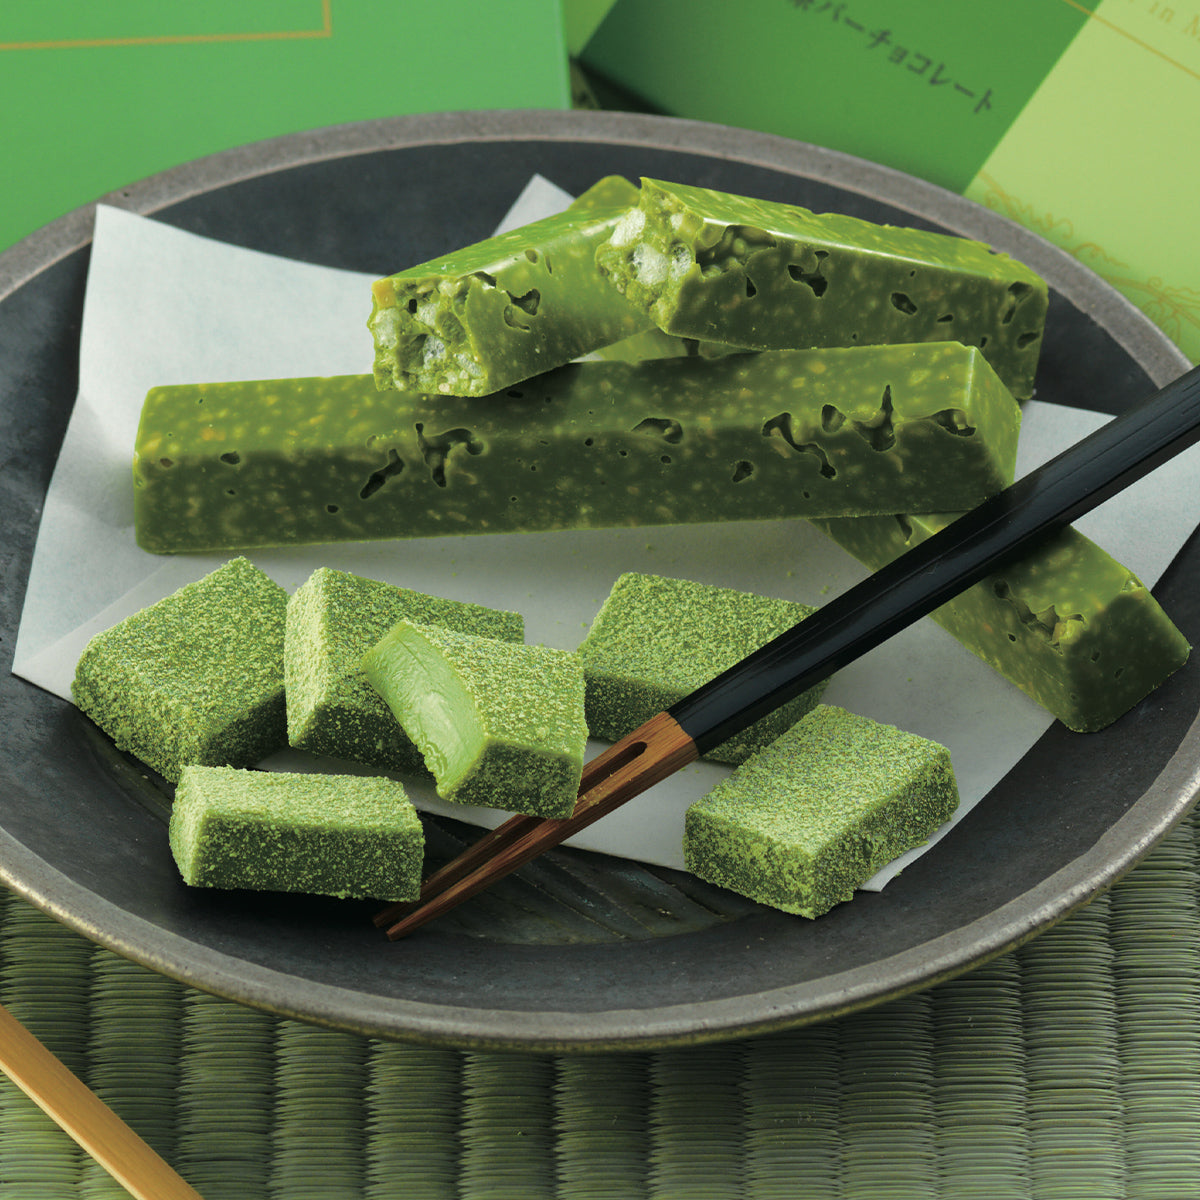 Image shows green-colored chocolates on a plate with paper and chopsticks.